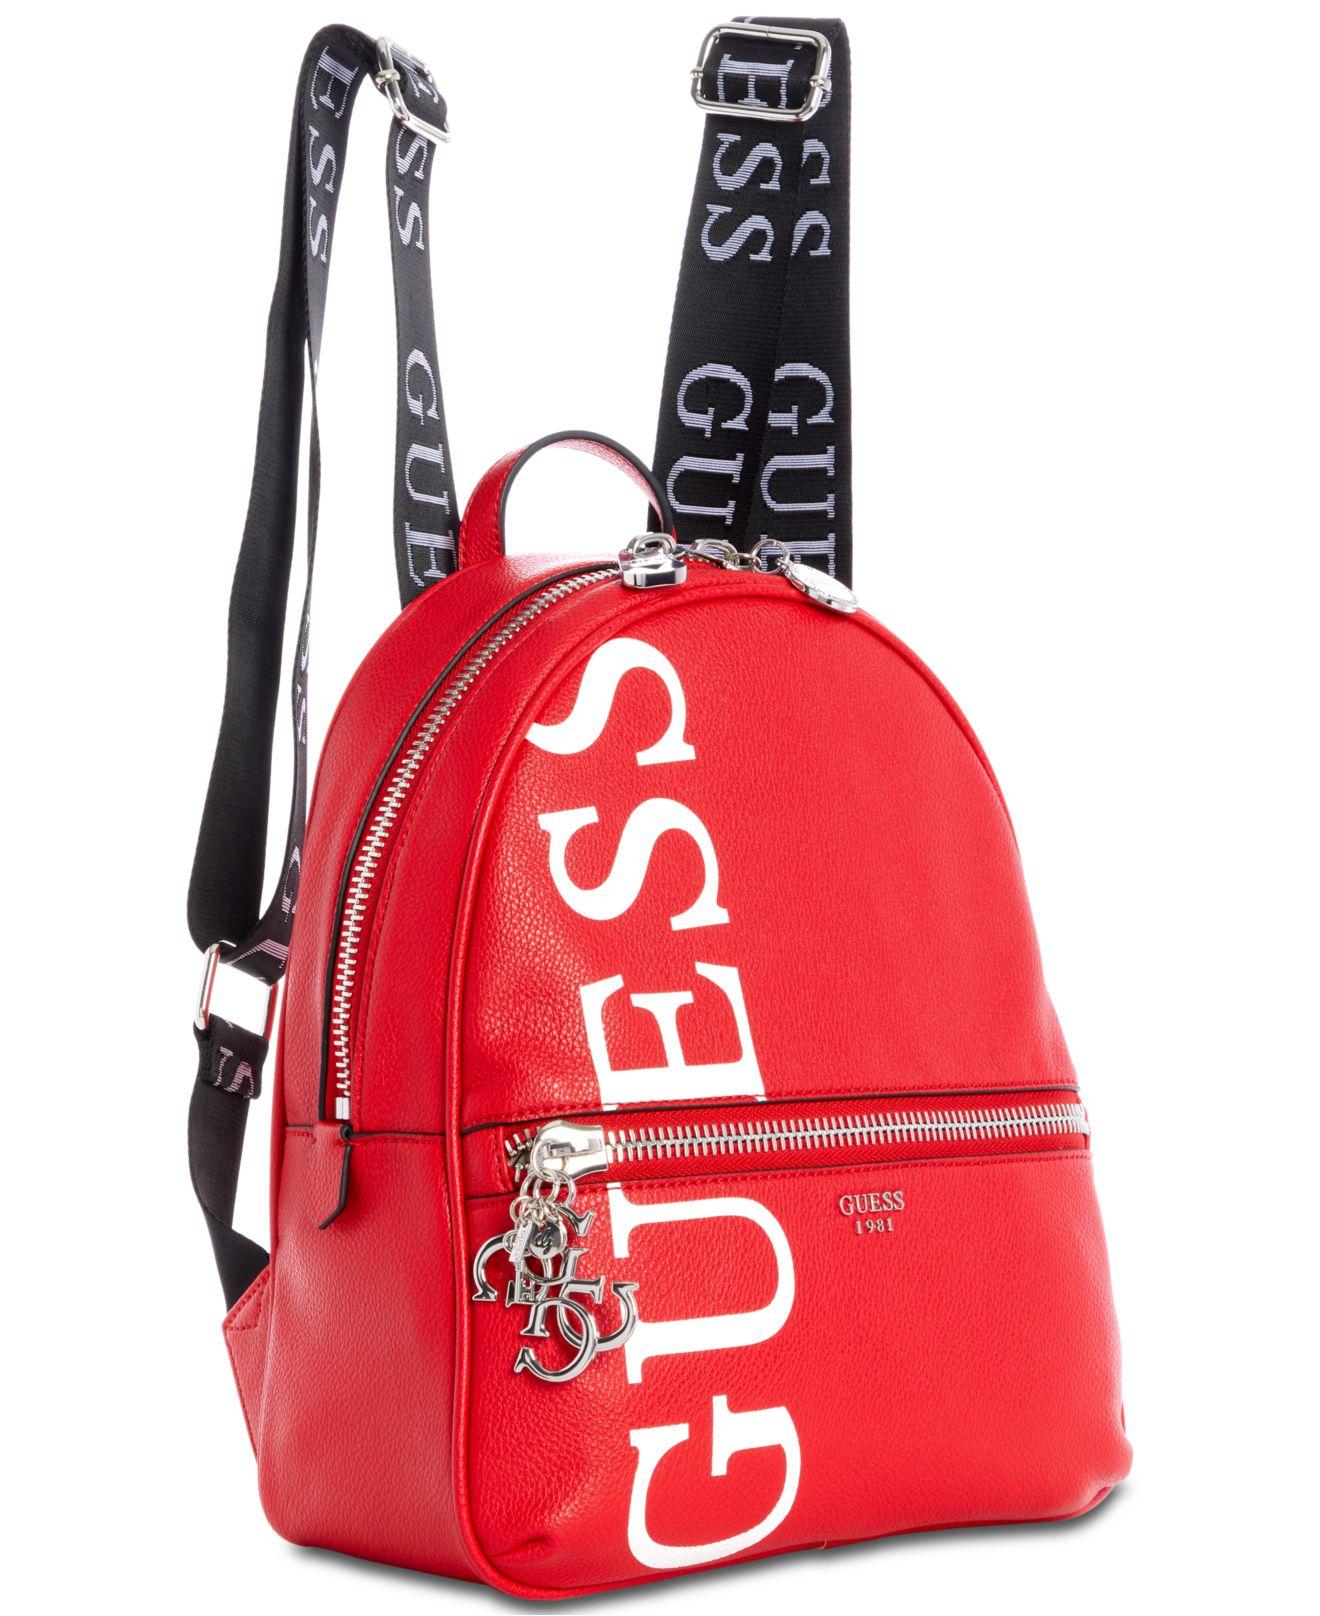 Guess Urban Chic Logo Backpack in Red | Lyst